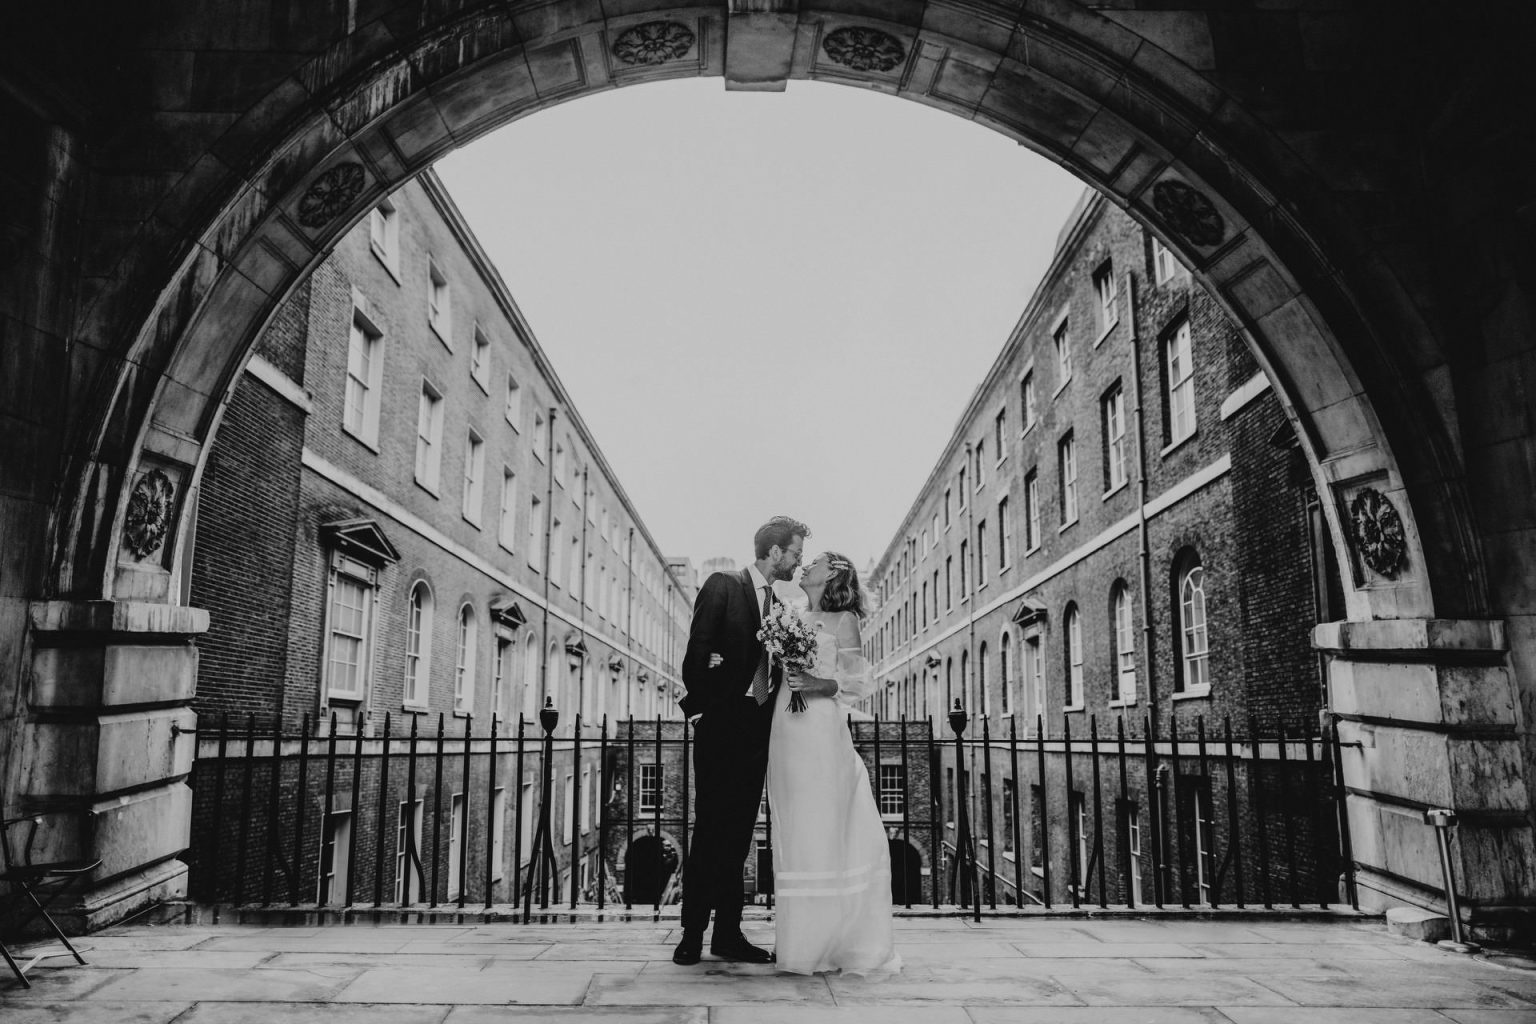 Couple Portraits_Lucy Judson Photography, Oxford wedding photographer